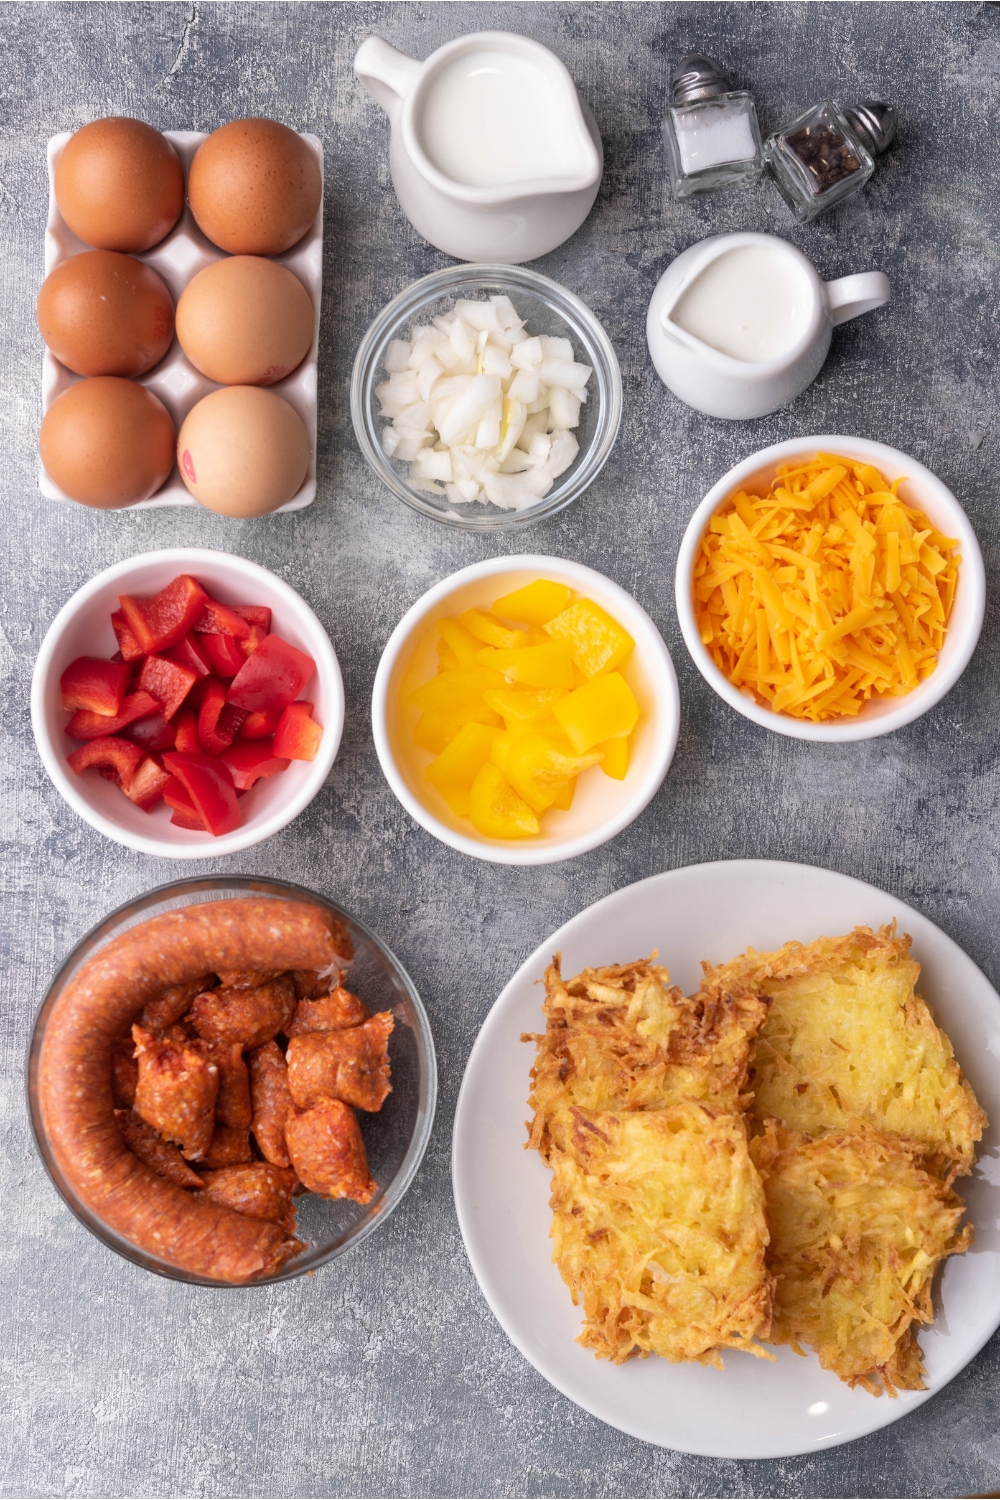 An assortment of ingredients for sausage casserole including a bowl of uncased sausage, bowls of bell peppers, shredded cheese, diced onion, a plate of hash browns, a half dozen eggs, cream, milk, and salt and pepper shakers.